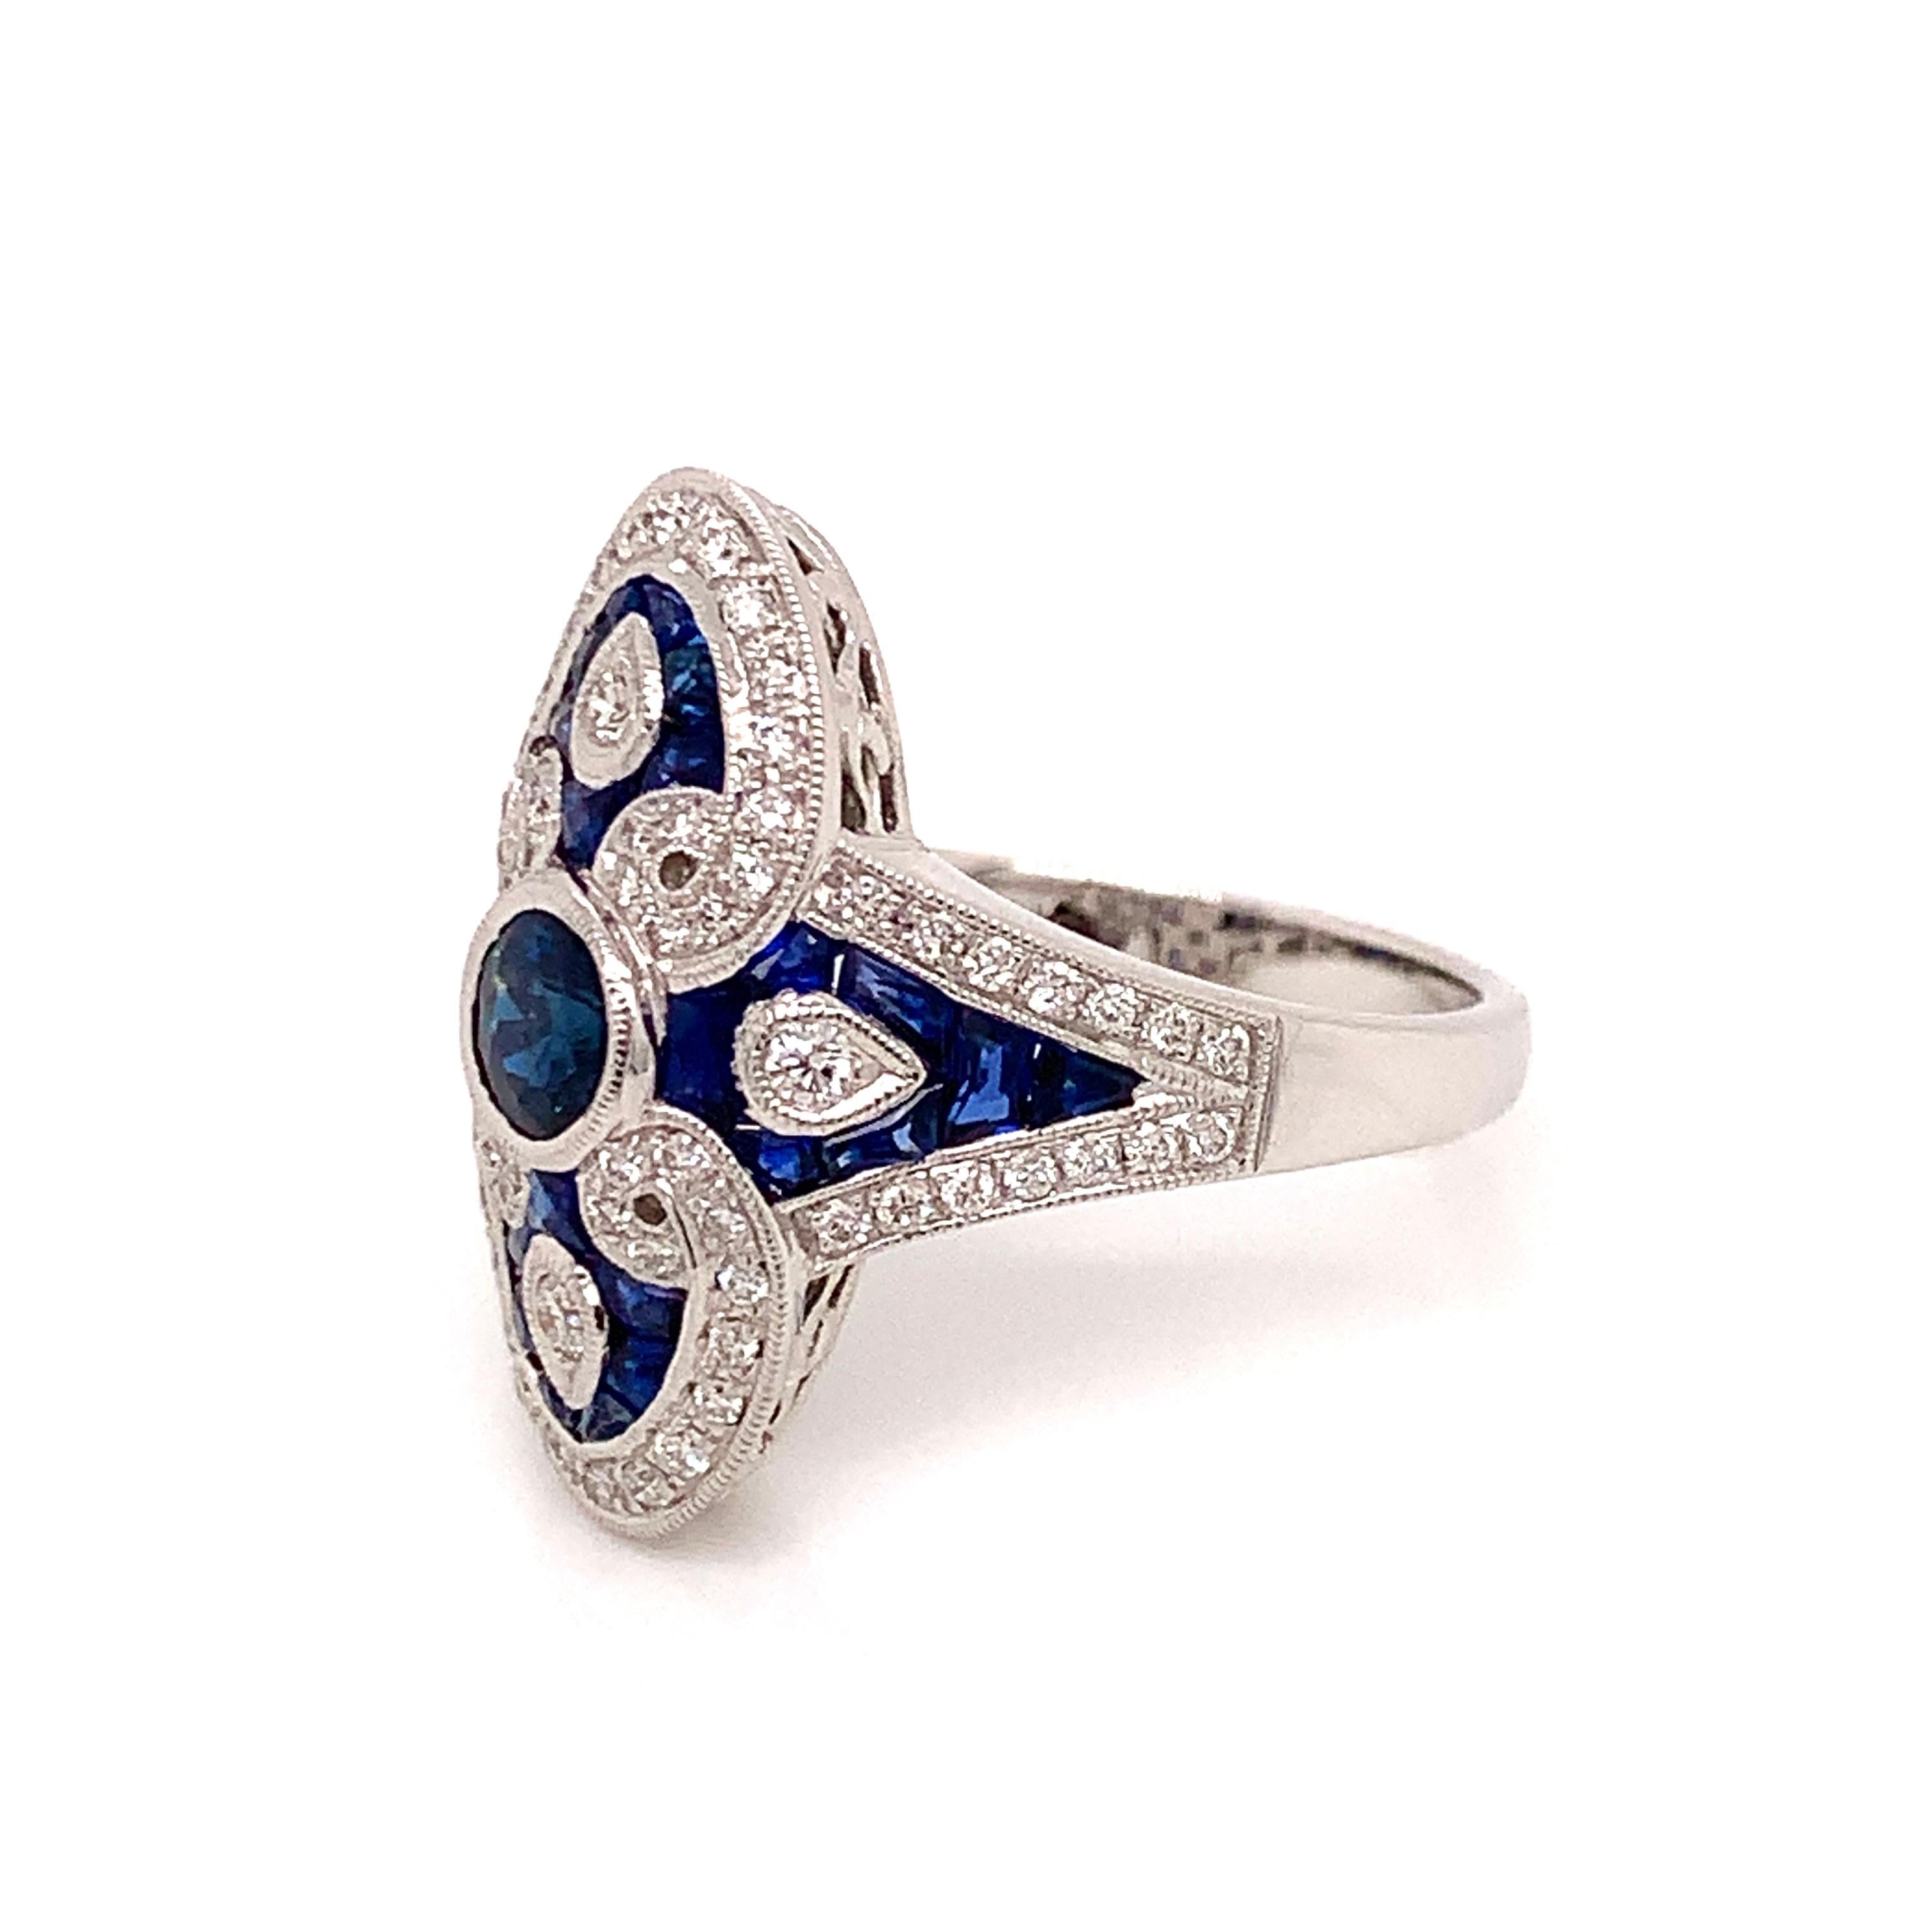 This vintage inspired ring by designer Beverley K is beautifully designed.  Its elongated shape is flattering on any hand.  A .66 carat round sapphire is surrounded by .47 cttw round diamonds and 1.00 cttw in french cut sapphires.  

This is a brand